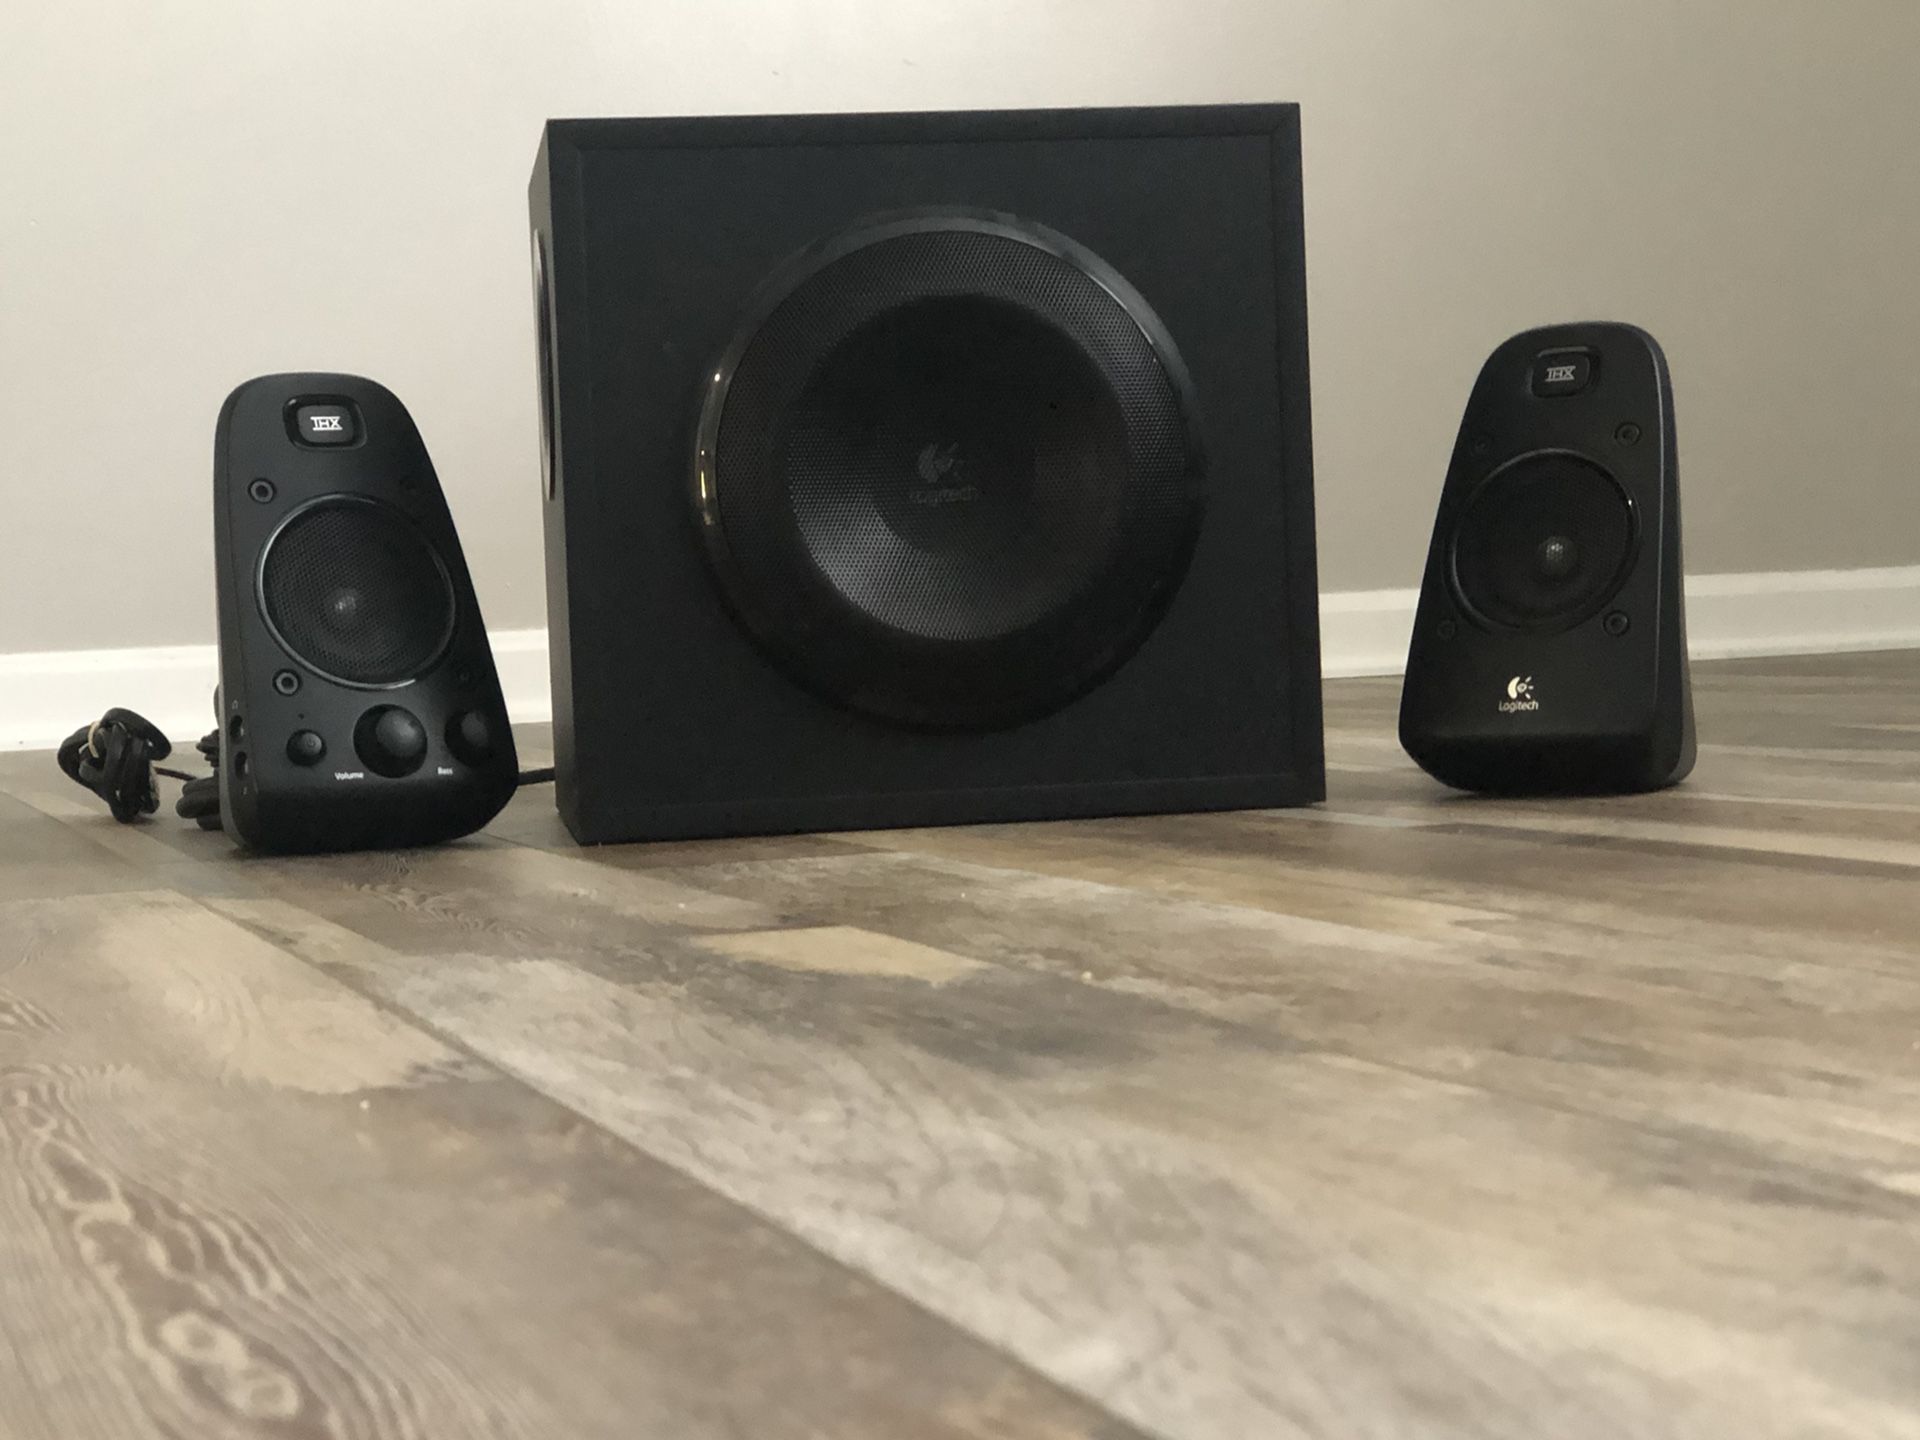 Subwoofer and speakers